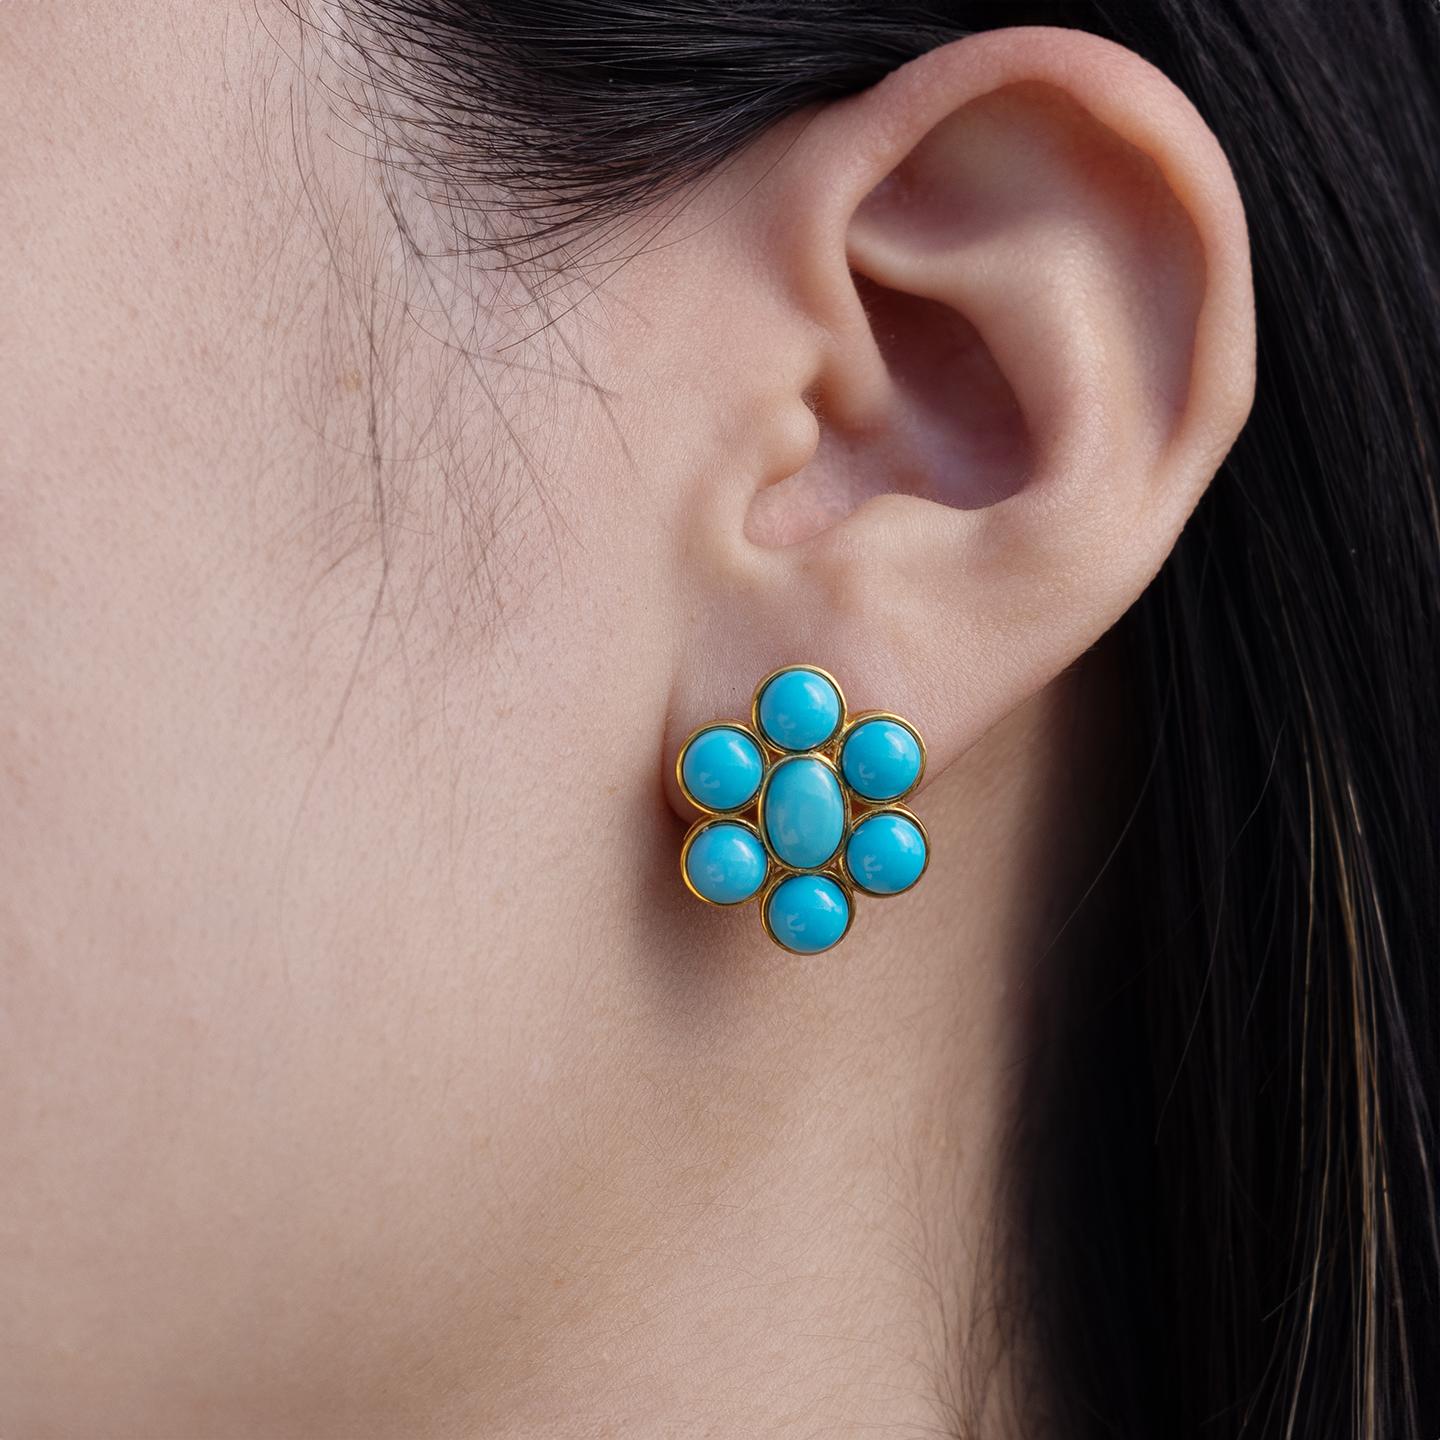 Discover Nina Zhou's Vintage Style 8.00ct Blue Turquoise Gemstone Cluster Earrings, exquisitely set in 18k yellow gold. Each earring is a testament to timeless design, featuring a mesmerizing cluster of vibrant blue turquoise stones that evoke the